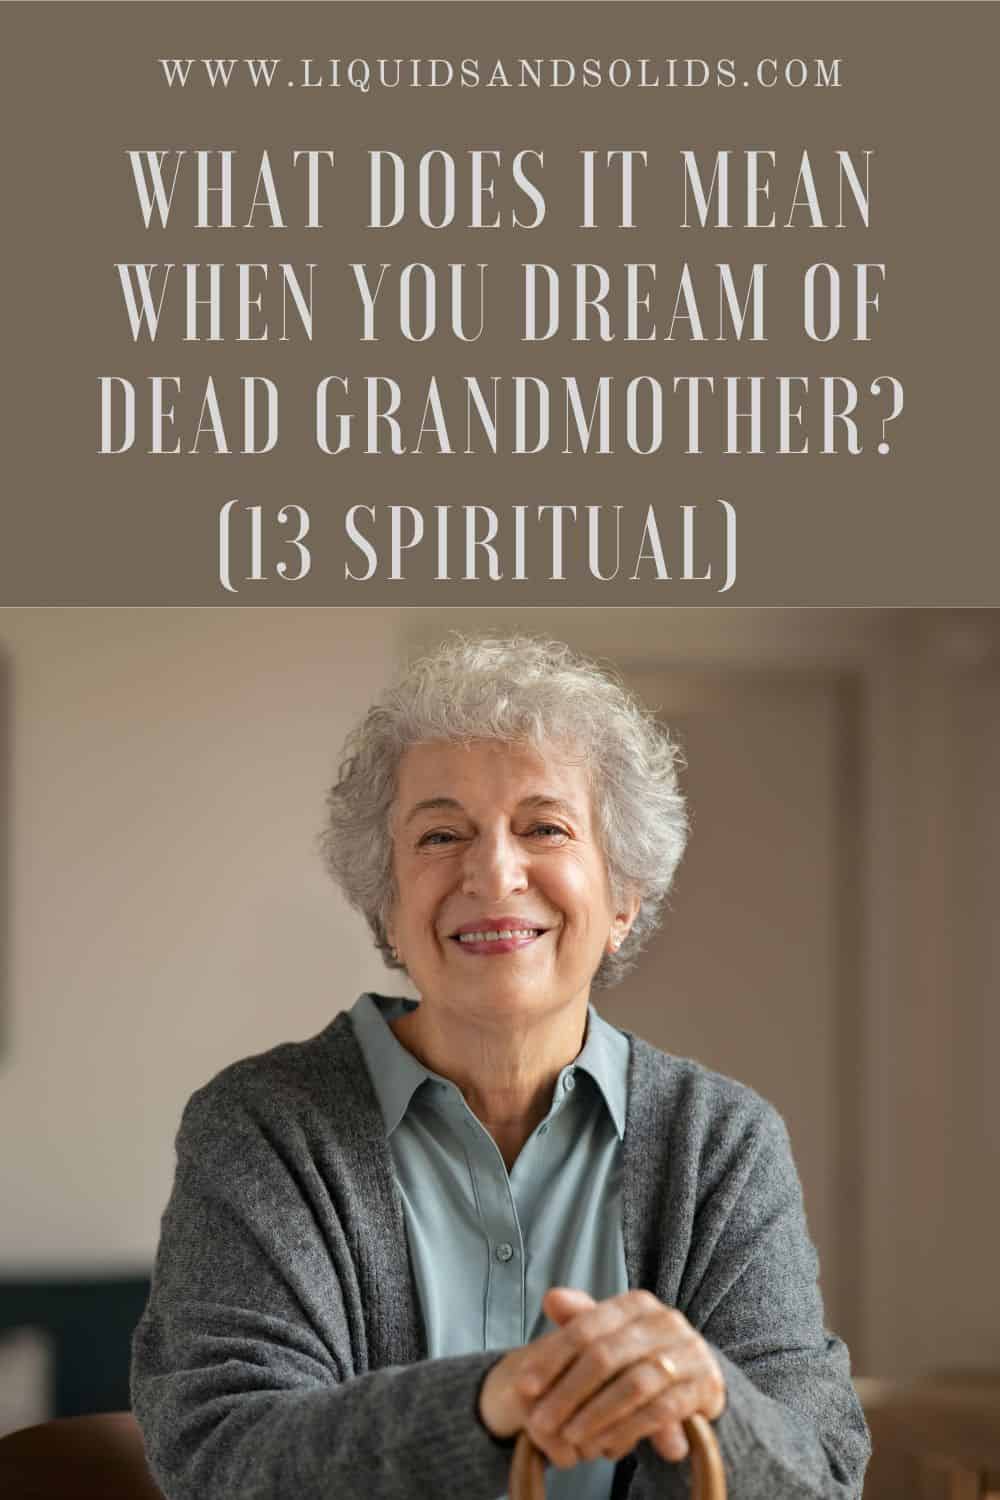 What Does It Mean When You Dream Of Dead Grandmother (13 Spiritual)